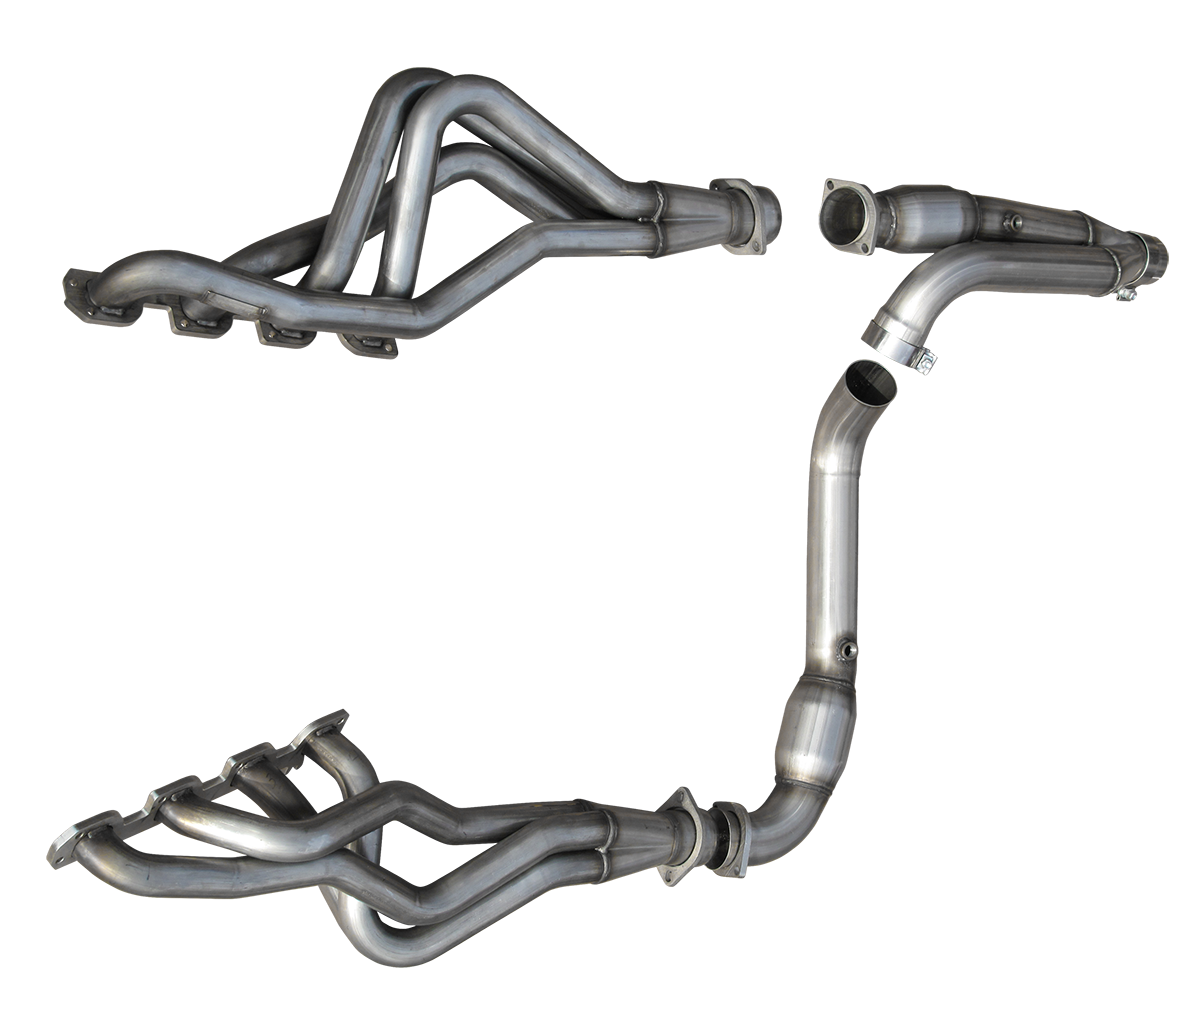 2006-2008 Dodge Ram 1500 American Racing Headers 1 3/4" x 3" Long Tube Headers w/3" Ypipe, No Cats & Pure Thunder Exhaust System